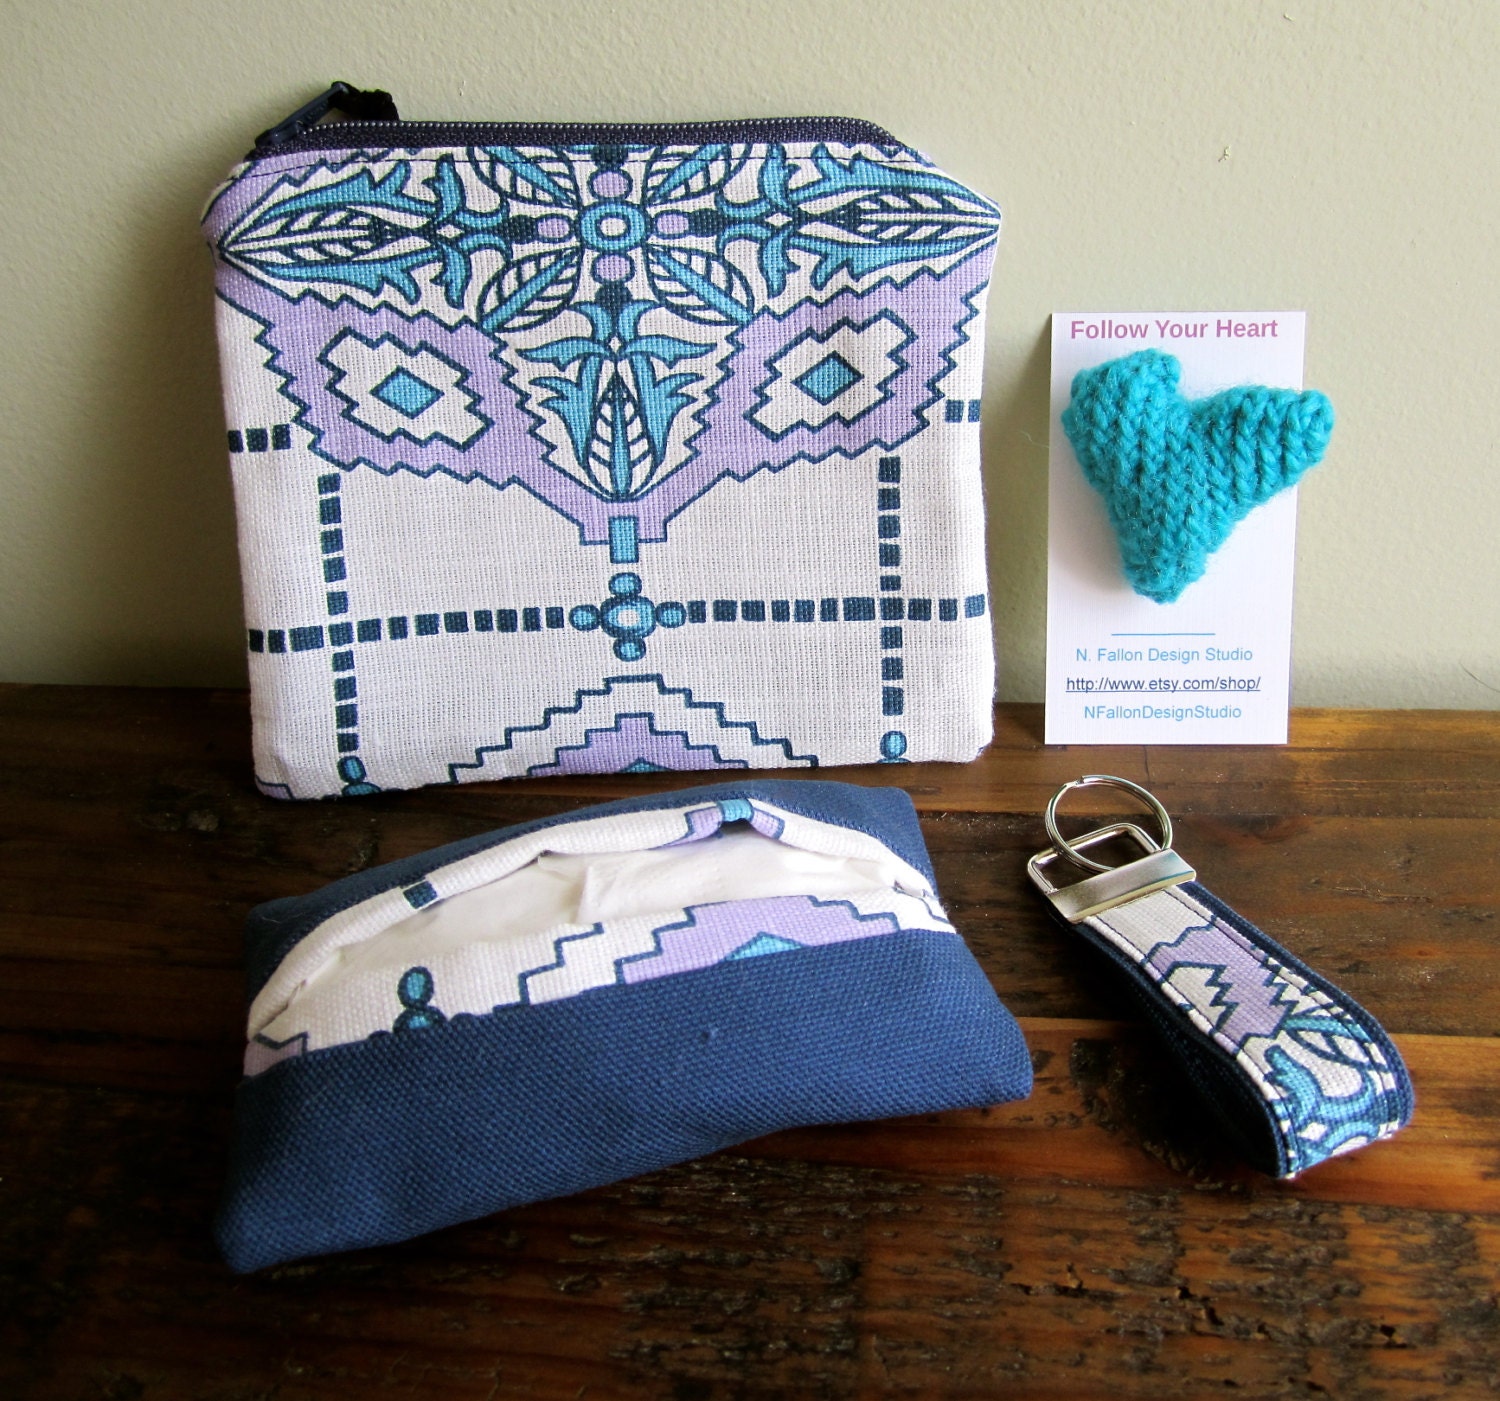 Valentine's Day Free Heart Pin Gift- Coin Purse, Keychain, Tissue Case: Organize Your Purse Kit in Navy & Lavender Southwest Print. - NFallonDesignStudio